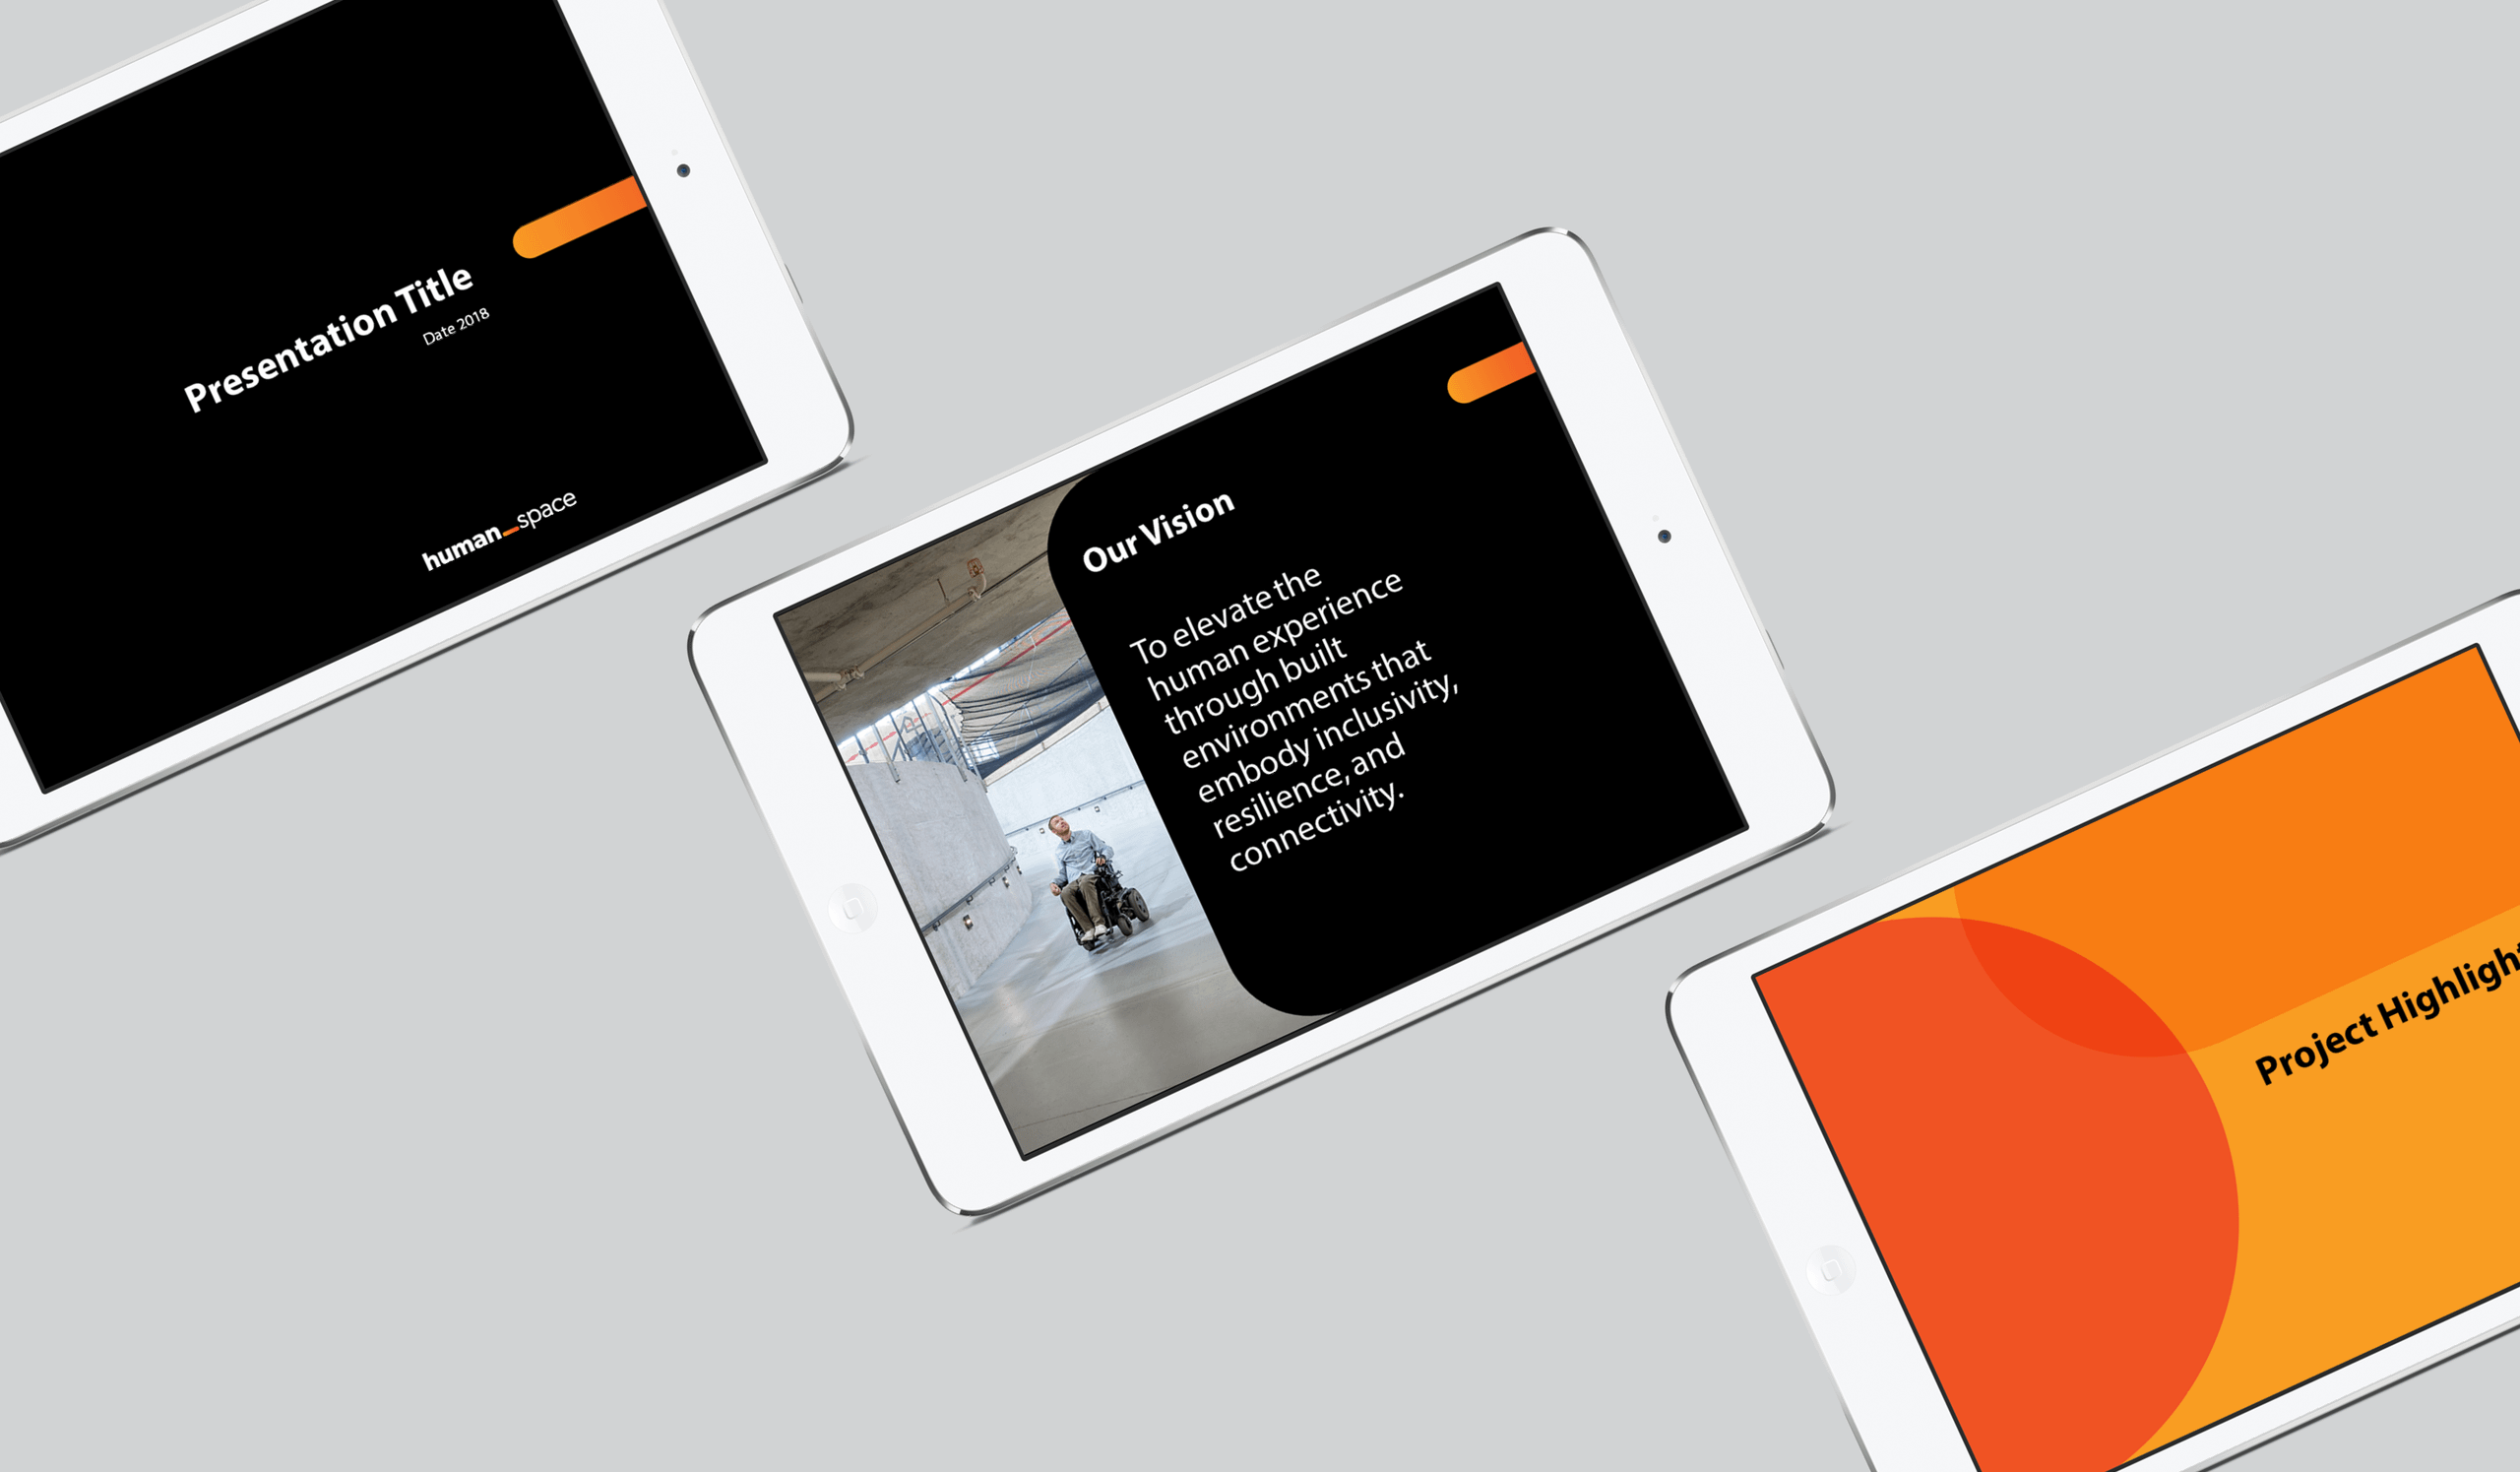 three tablets showing a Human Space presentation title page, a presentation slide titled "Our Vision" on black beside a photo of a man in a mobility device using a ramp, and a presentation slide "Project Highlights" on orange background with darker orange